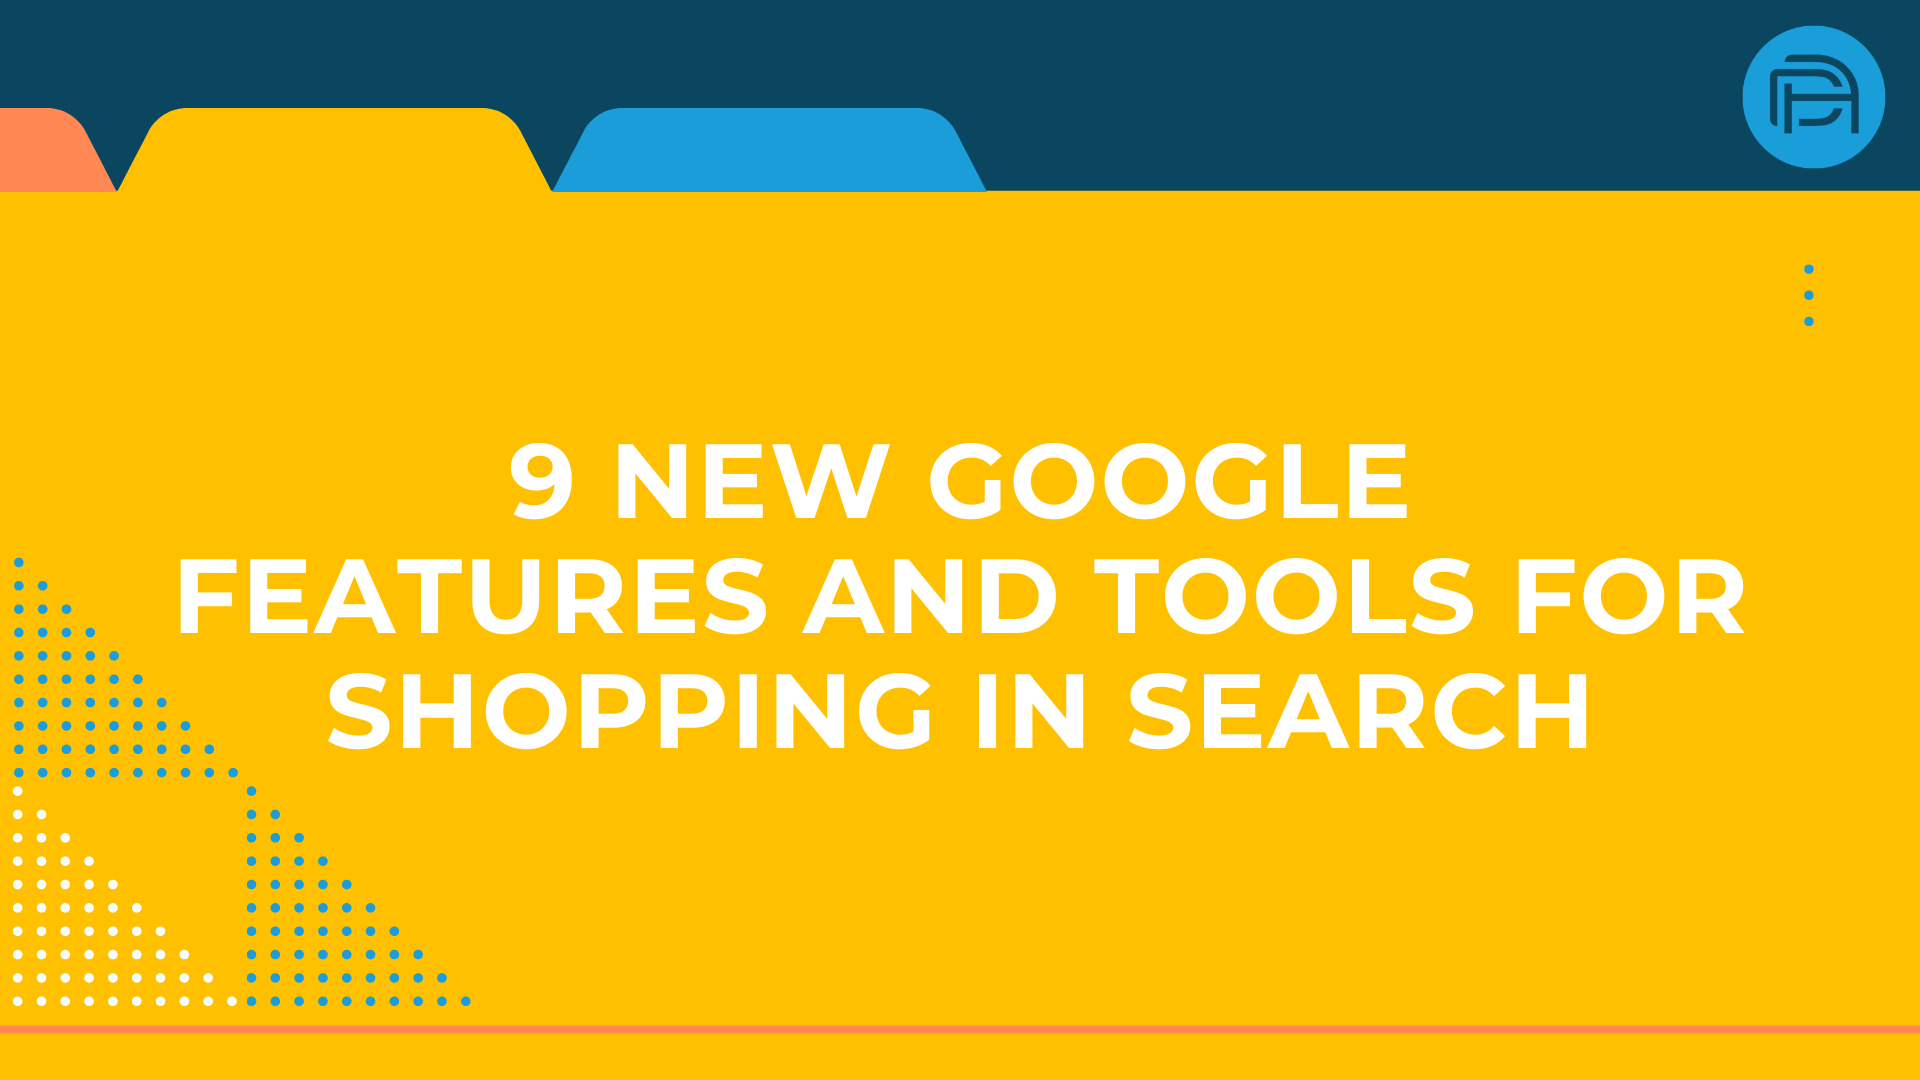 Google Announces 9 New Features and Tools for Shopping in Search